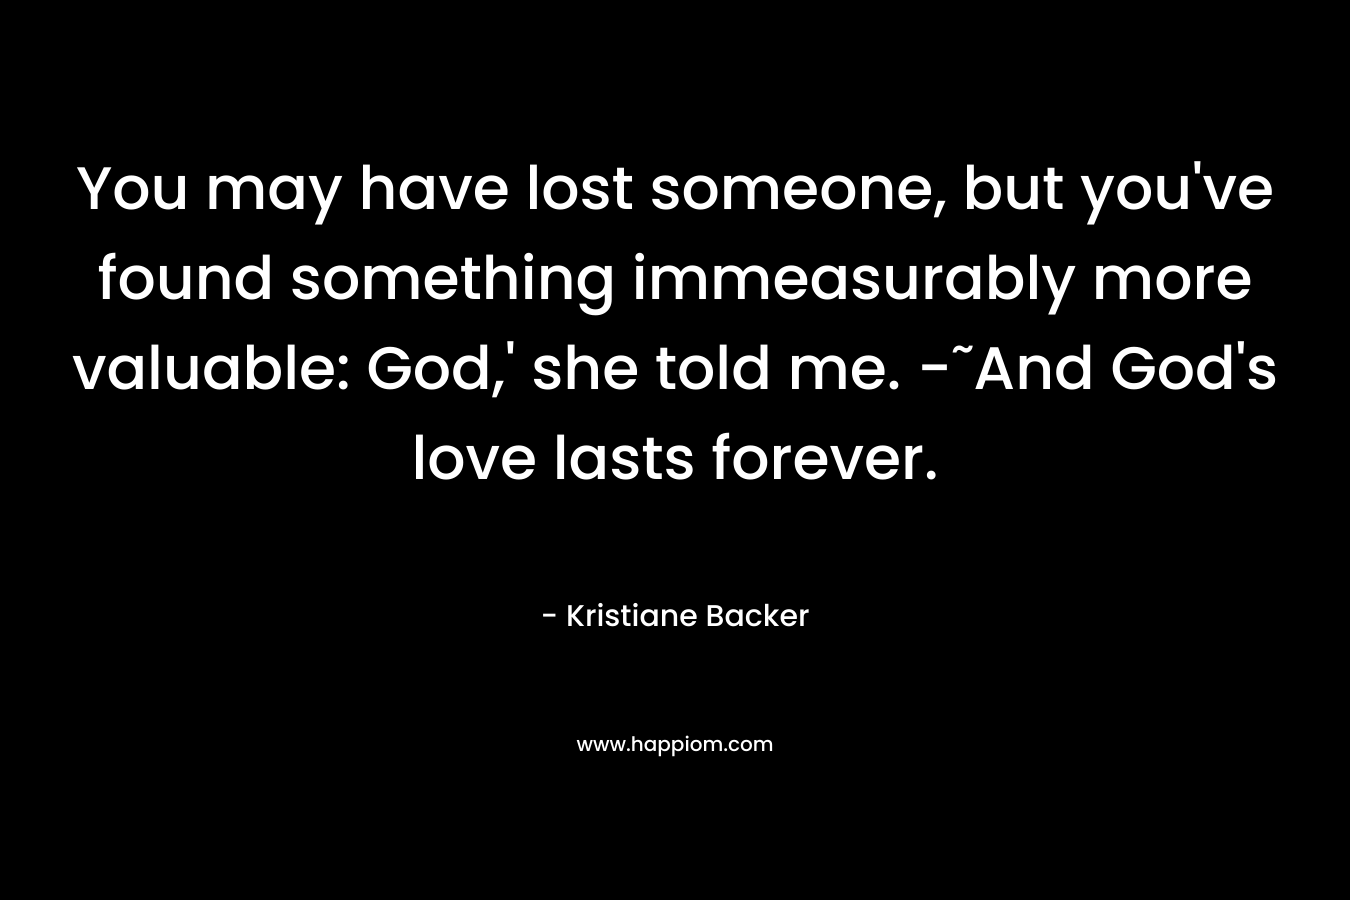 You may have lost someone, but you've found something immeasurably more valuable: God,' she told me. -˜And God's love lasts forever.